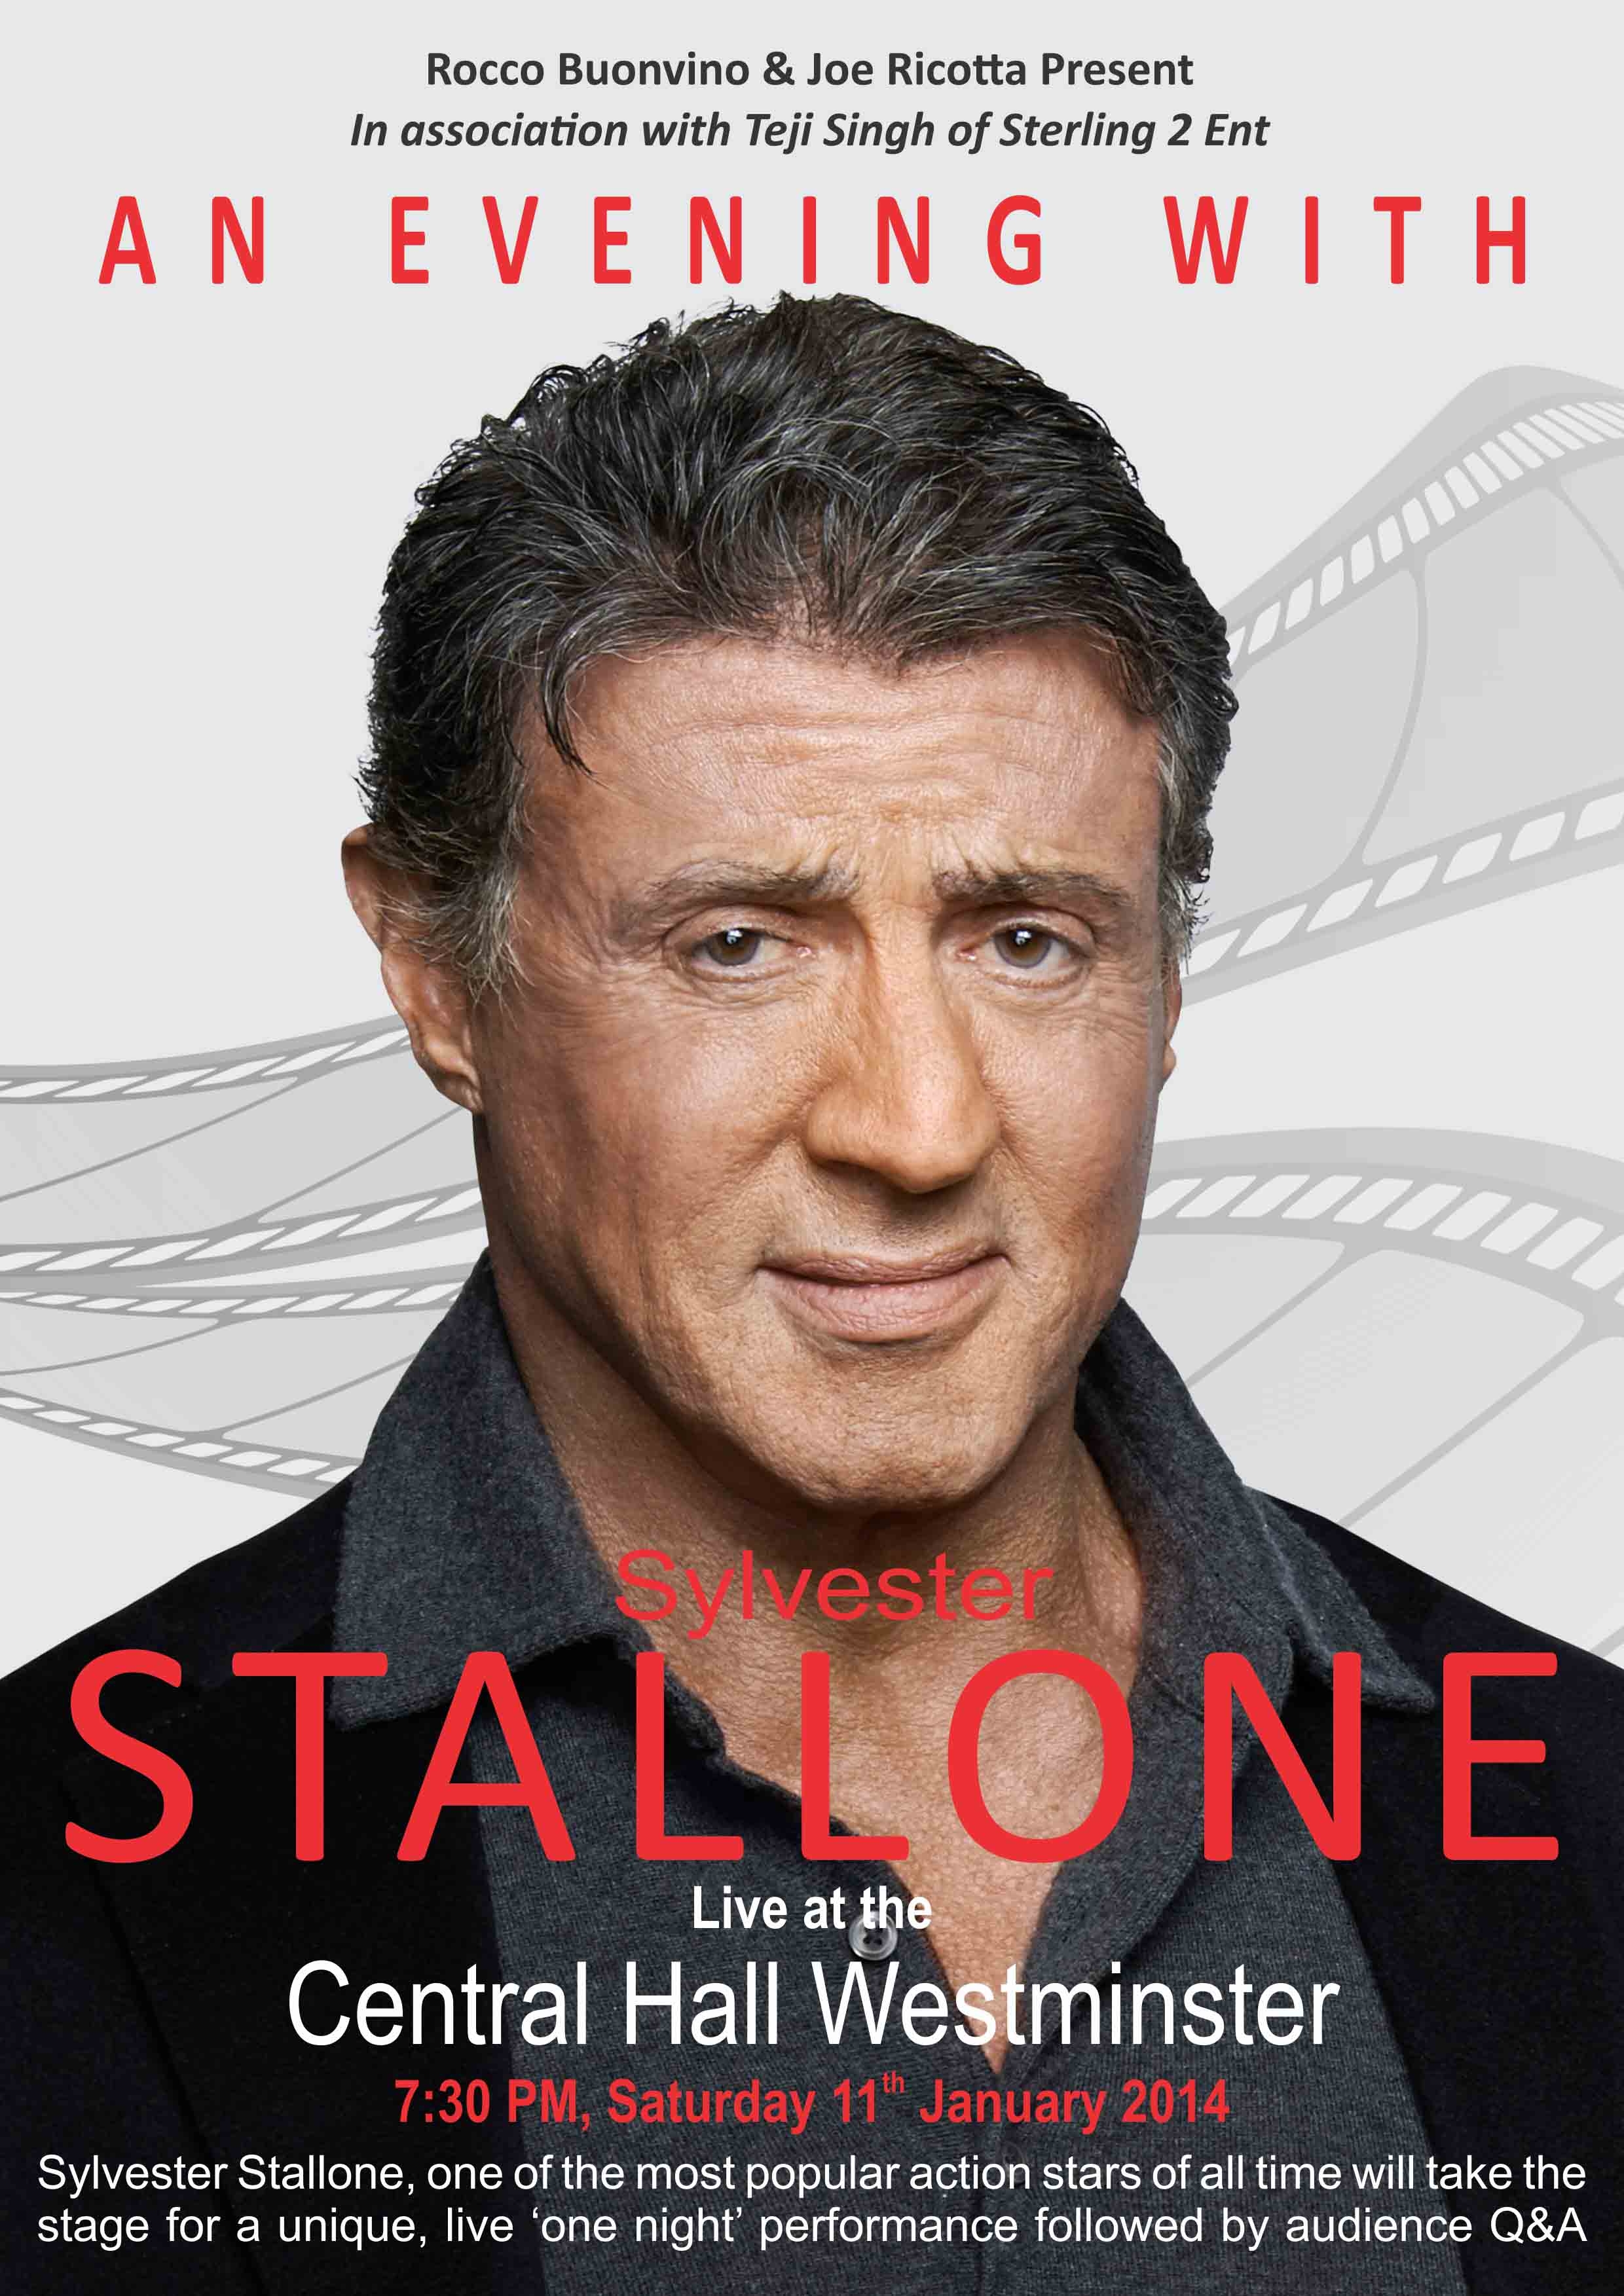 AN EVENING WITH SYLVESTER STALLONE IN LONDON ANNOUNCED